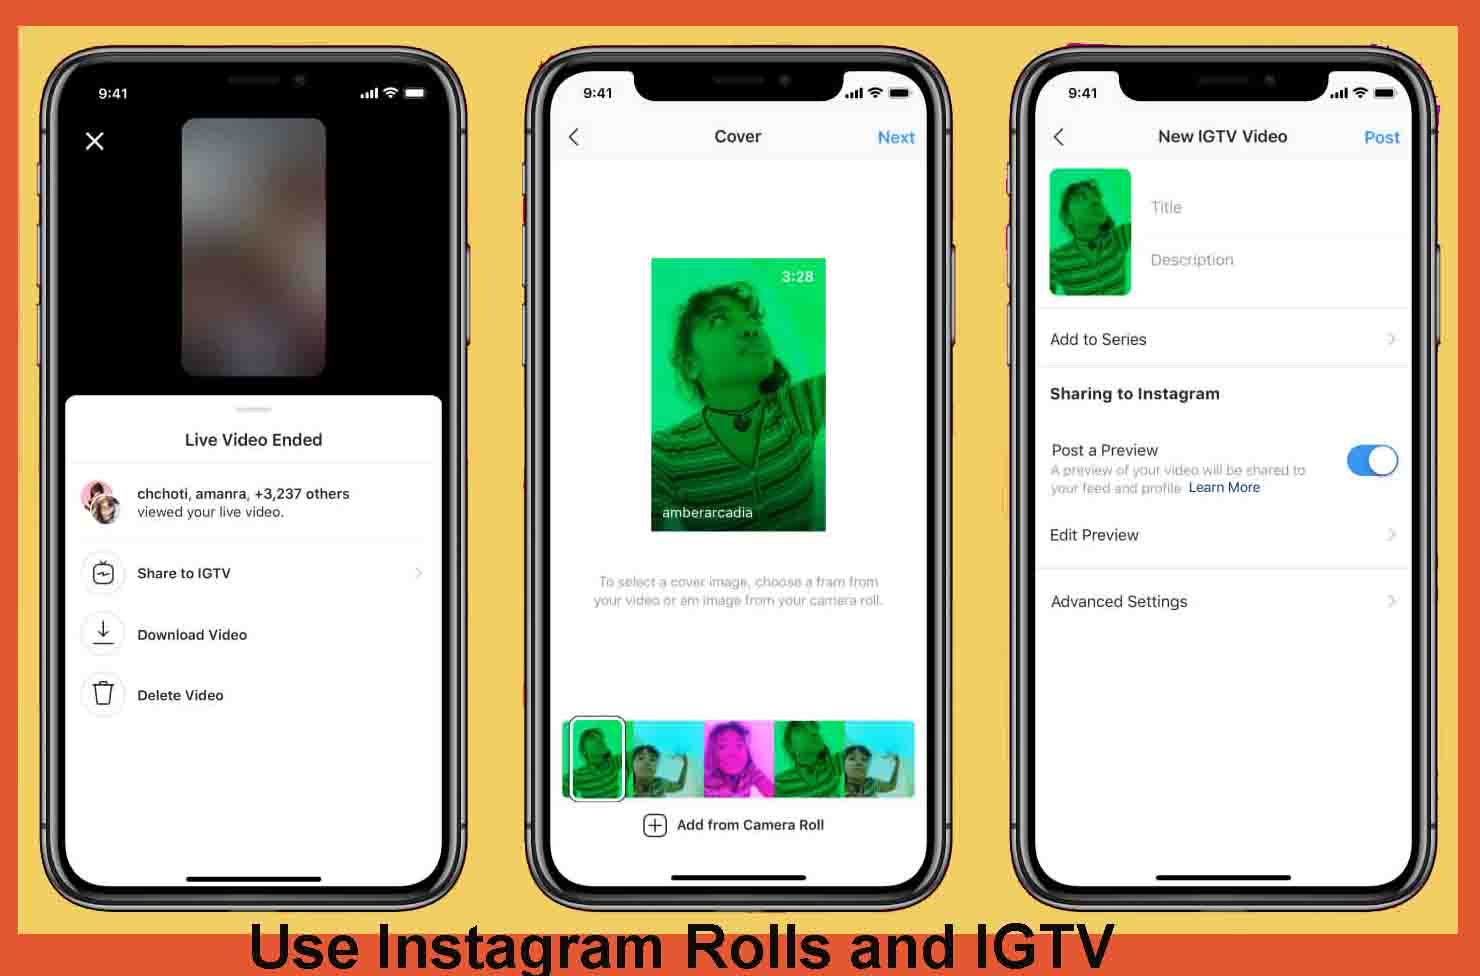 Use Instagram Rolls and IGTV